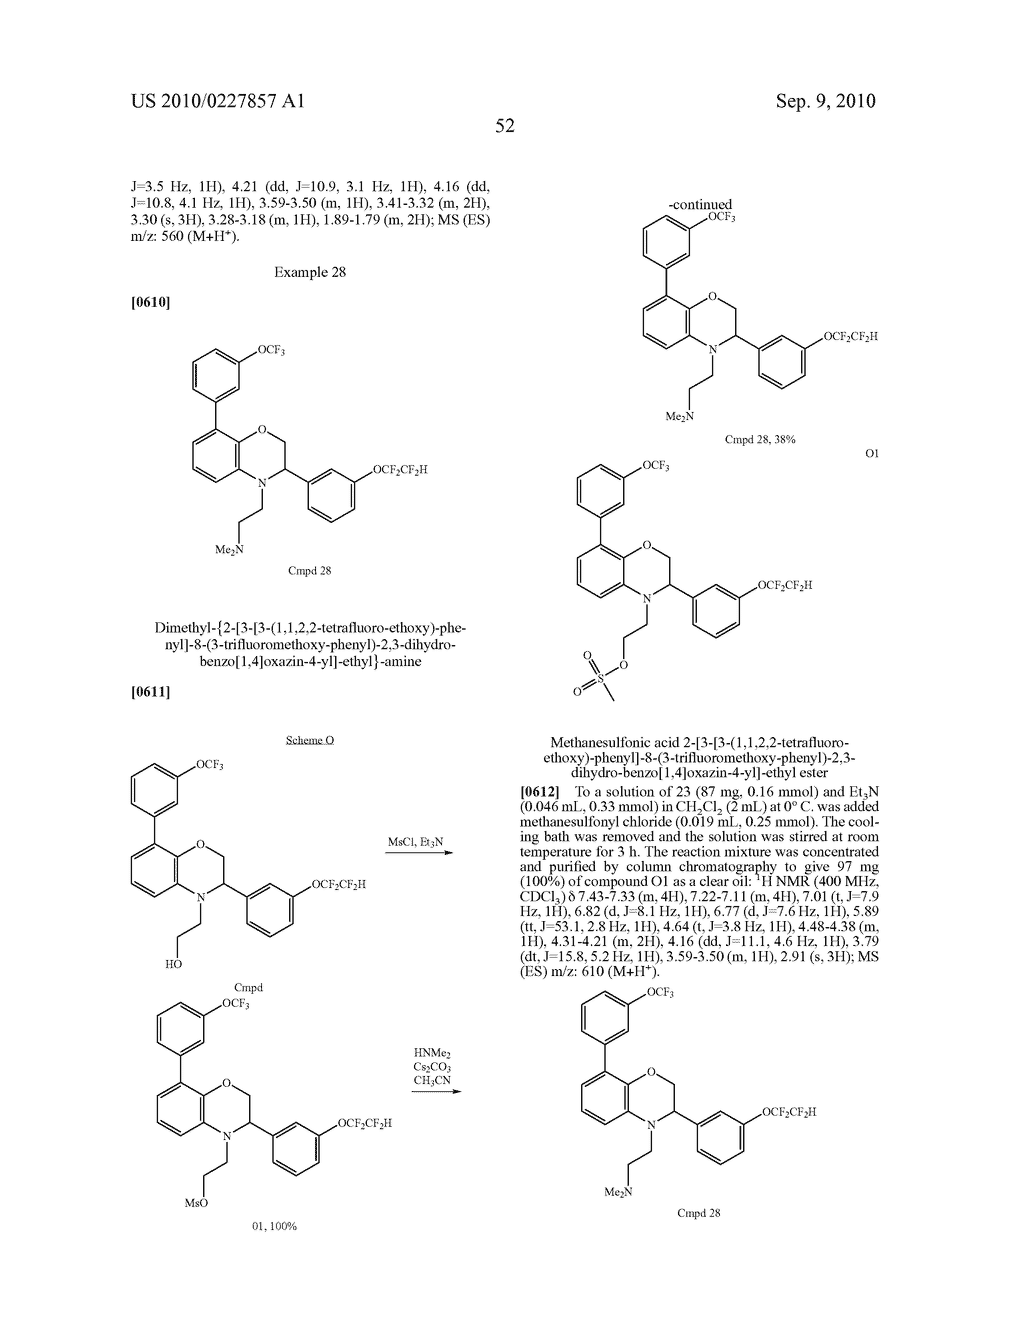 3,4-DIHYDRO-2H-BENZO[1,4]OXAZINE AND THIAZINE DERIVATIVES AS CETP INHIBITORS - diagram, schematic, and image 53